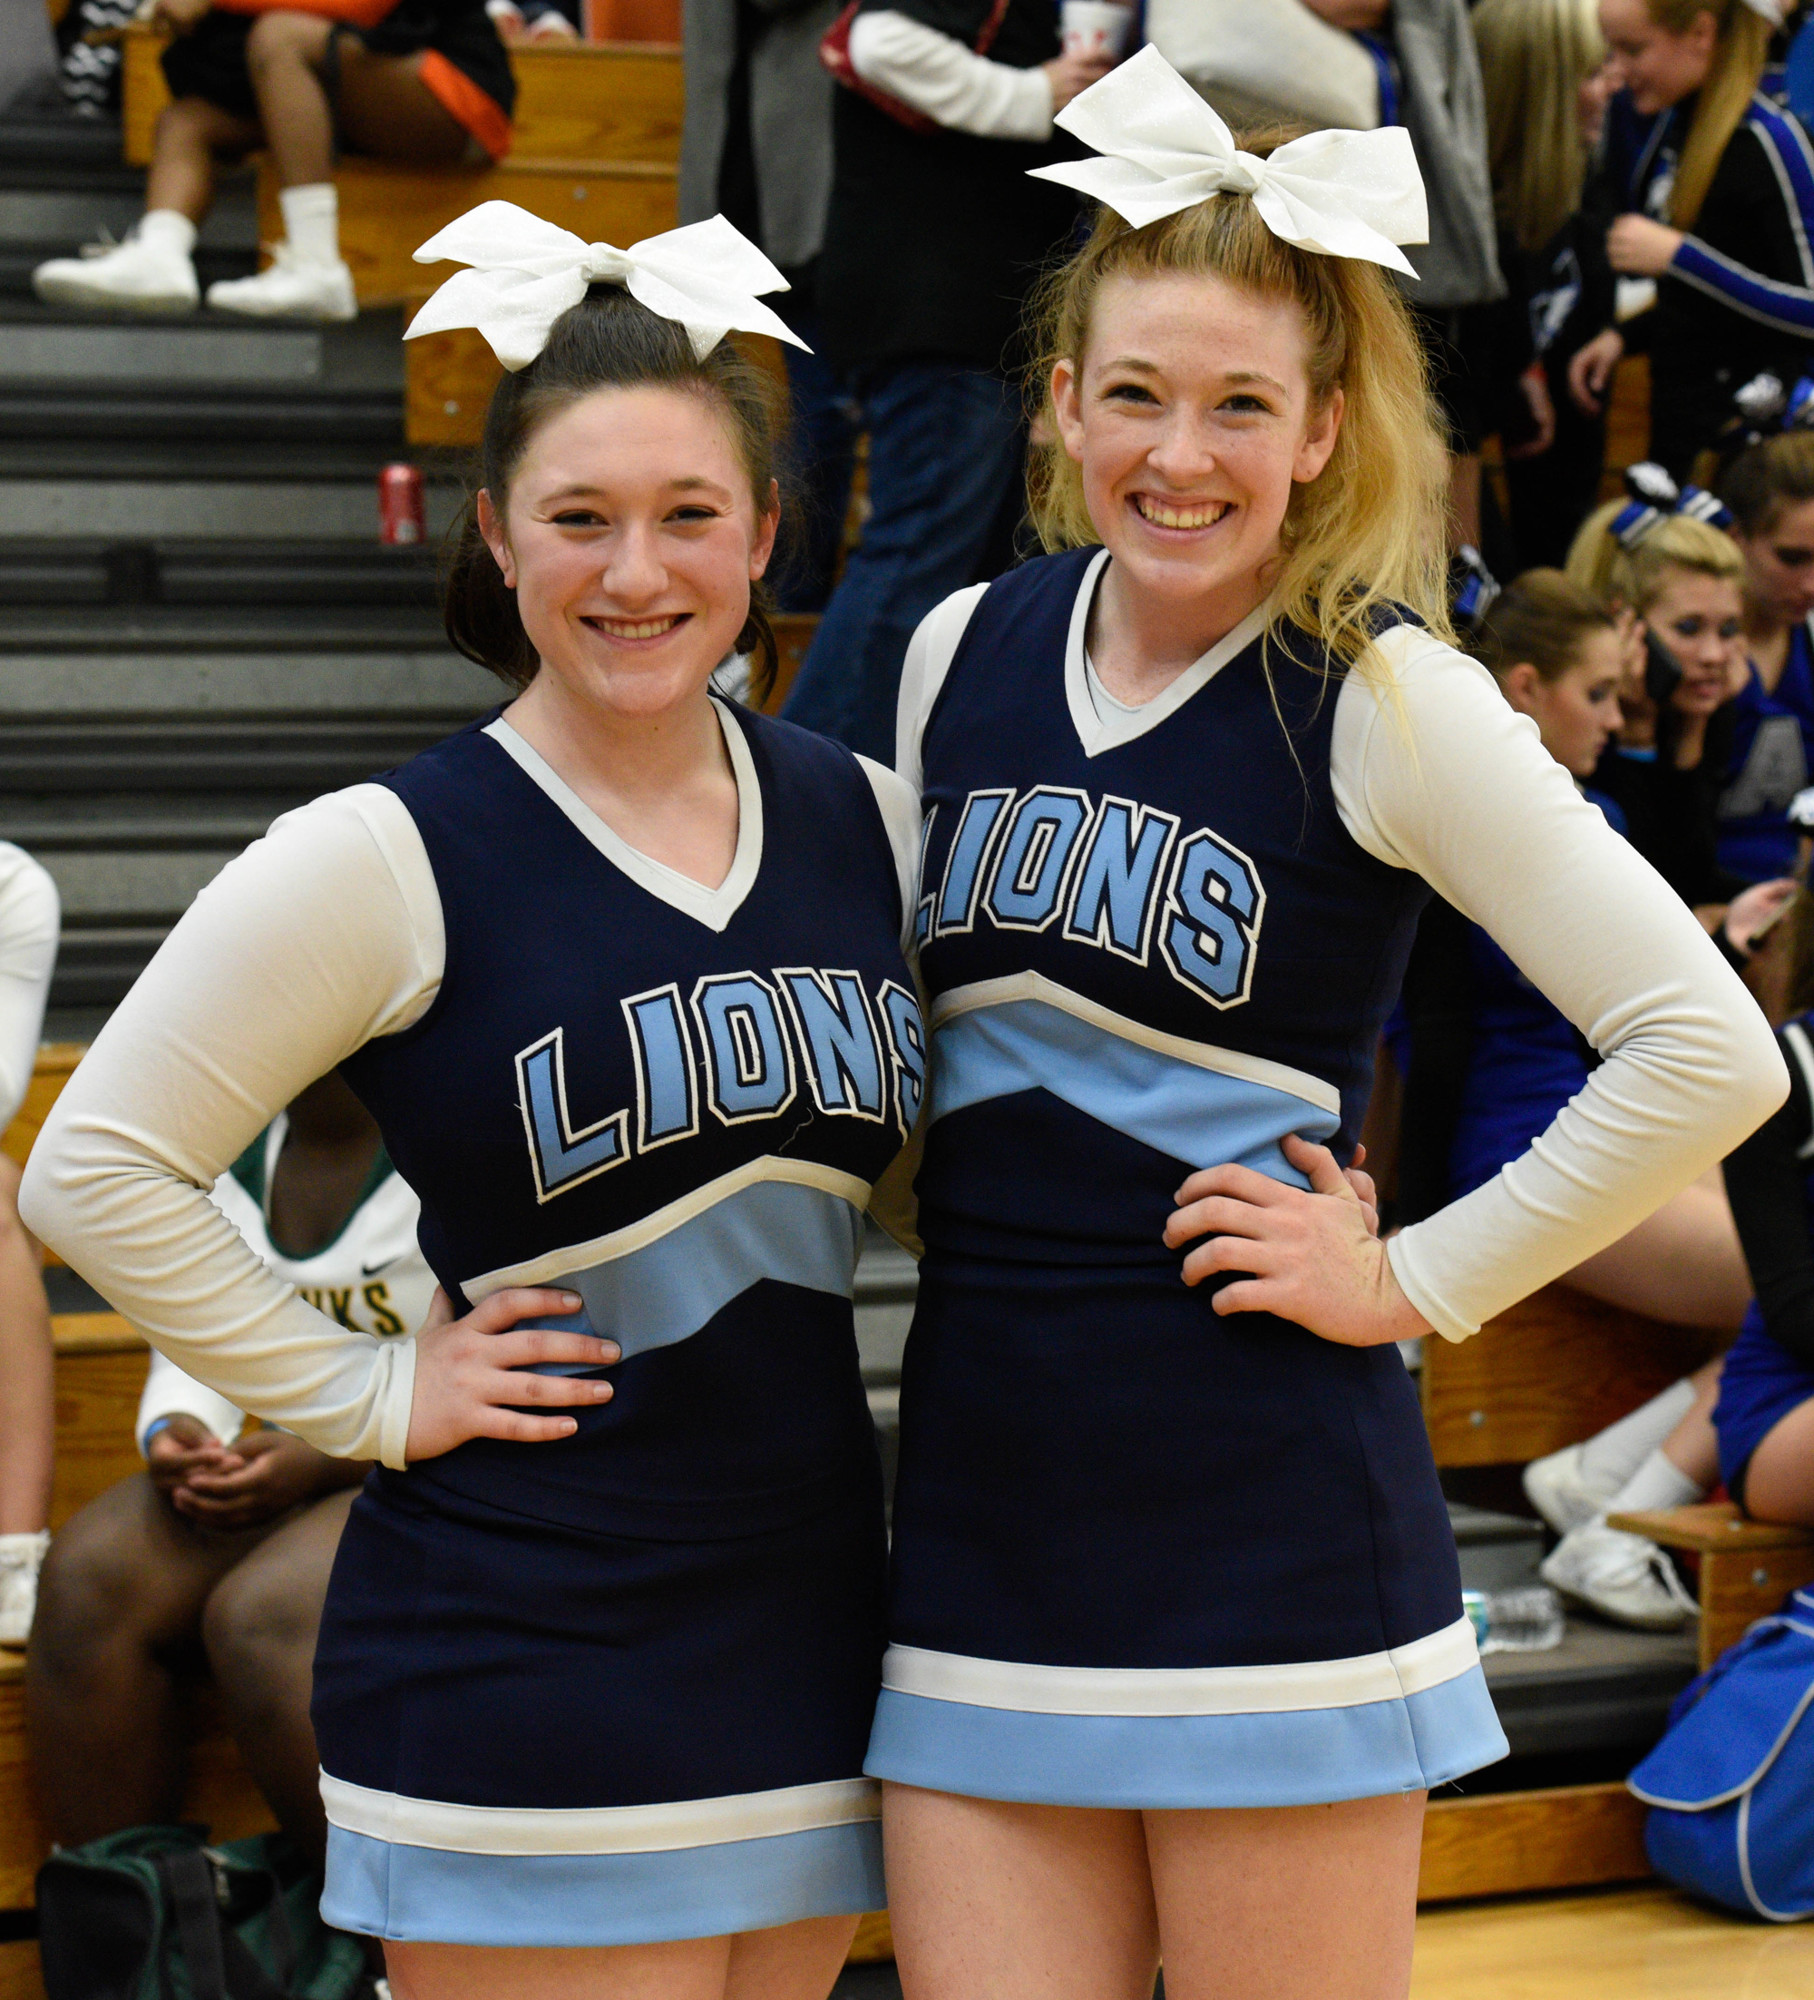 Captains Maddi DeStefano and Reilly Lord have played a big role in the Lions' success this season.